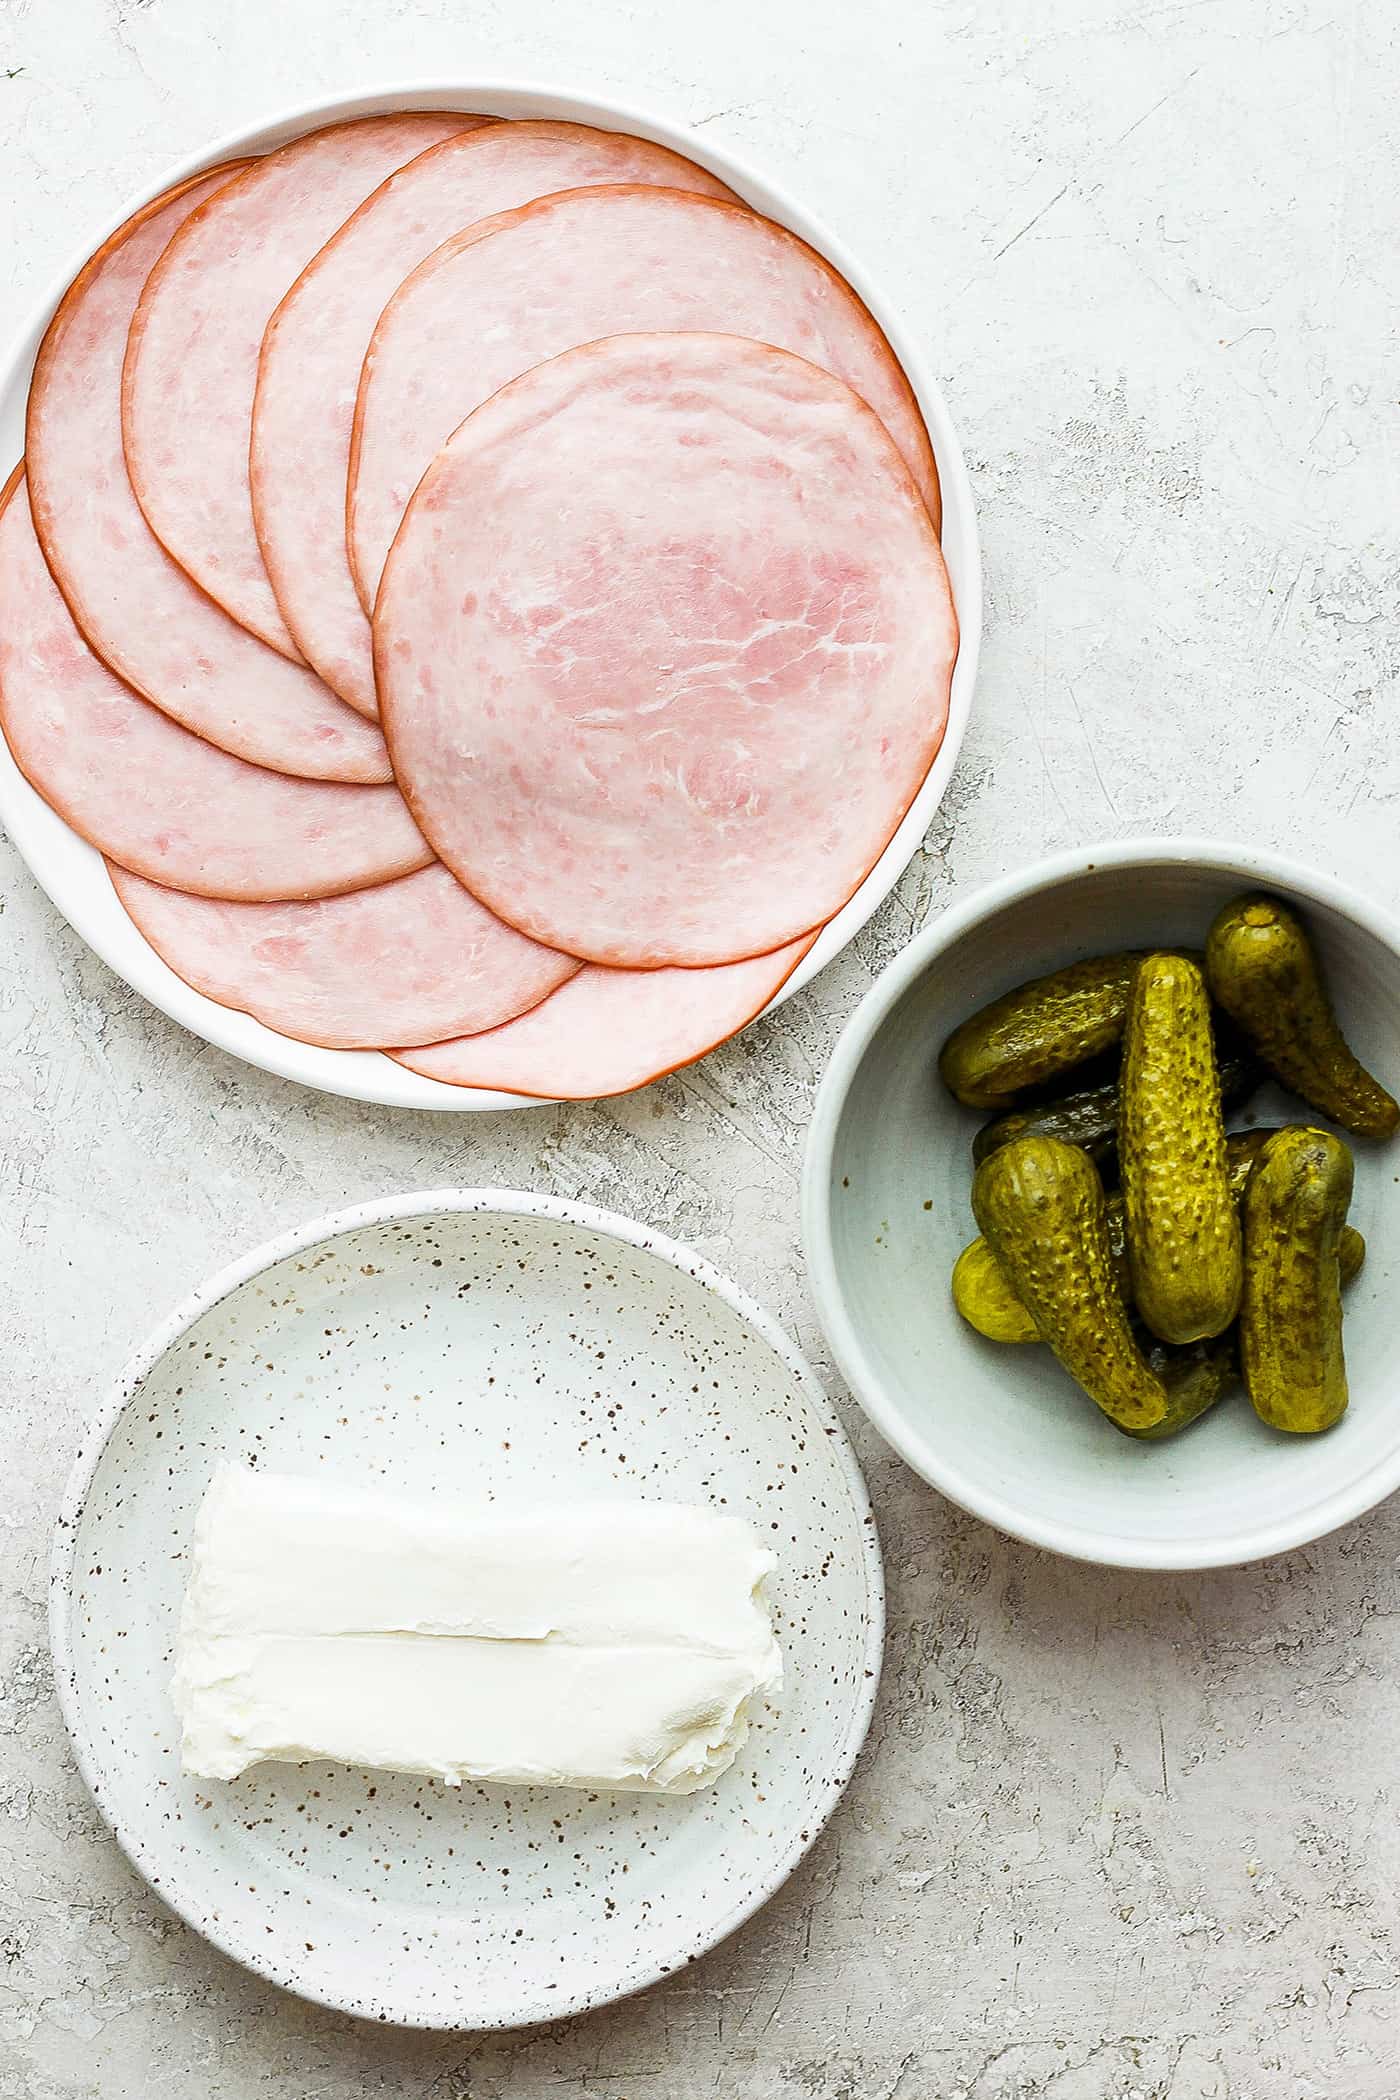 Ingredients for pickle roll ups: sliced ham, cream cheese, and pickles.